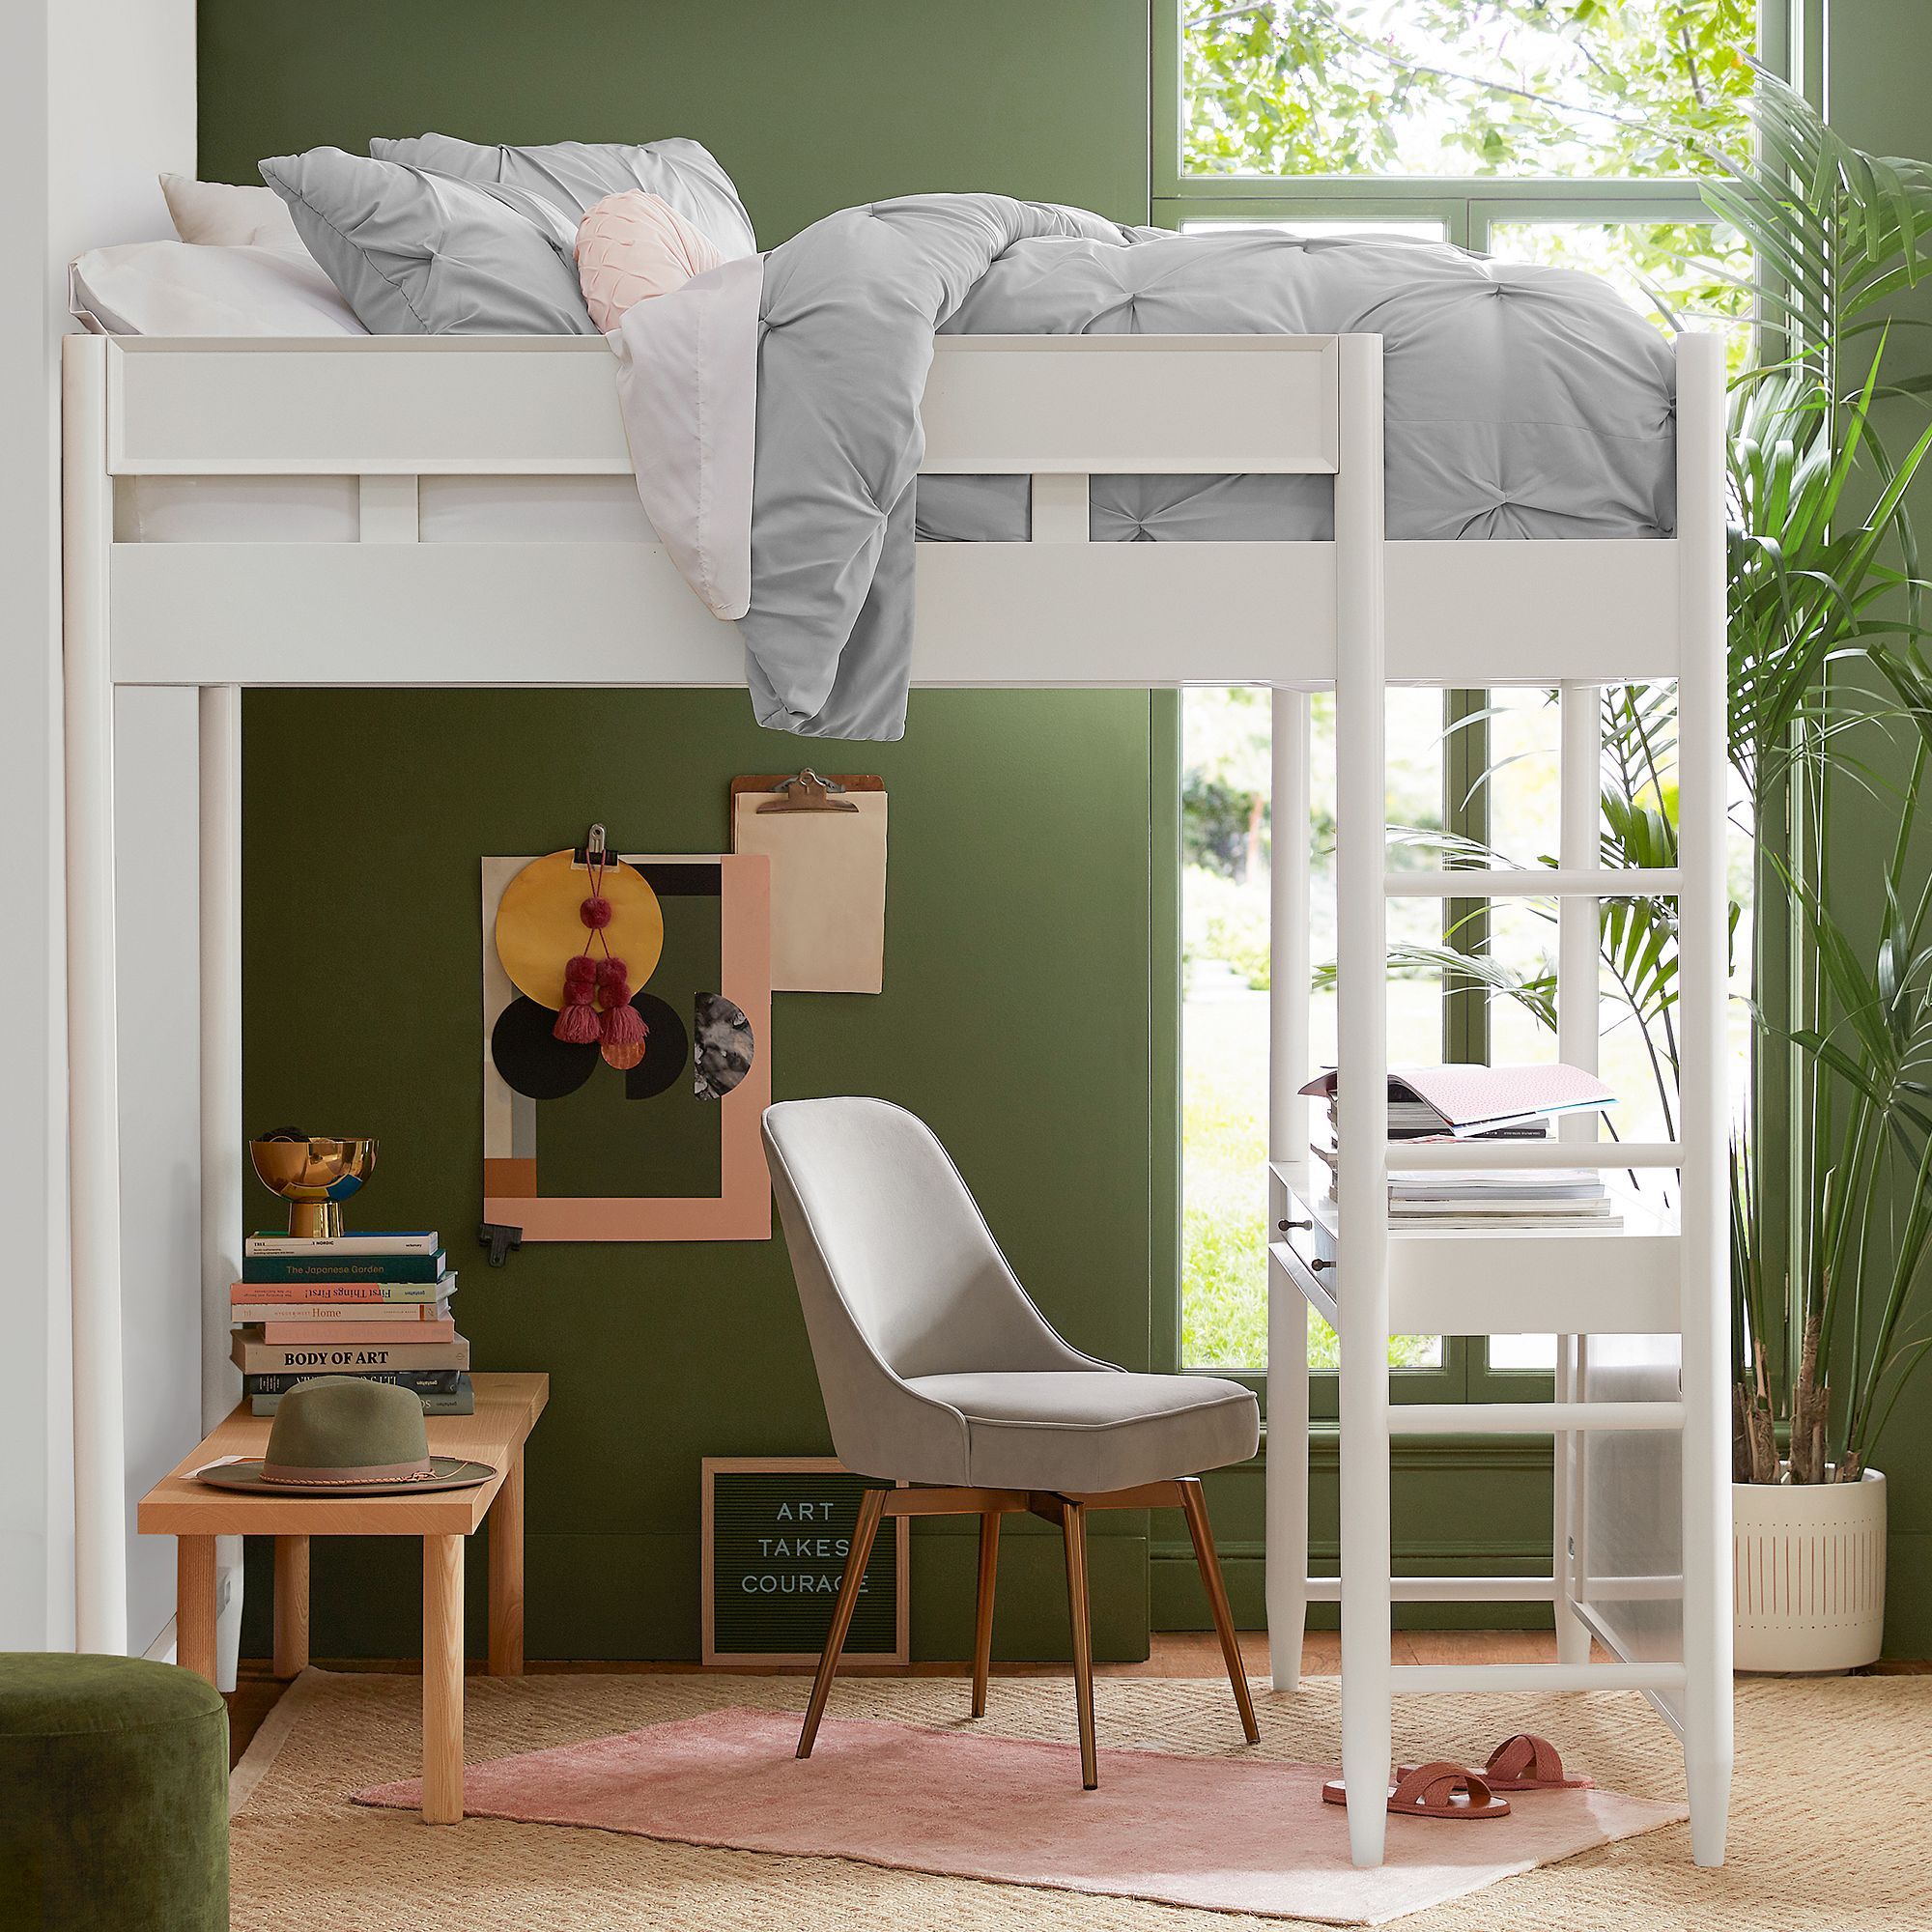 20 Cool Bunk Beds 2023 - Stylish Bunk Beds For Adults And Kids